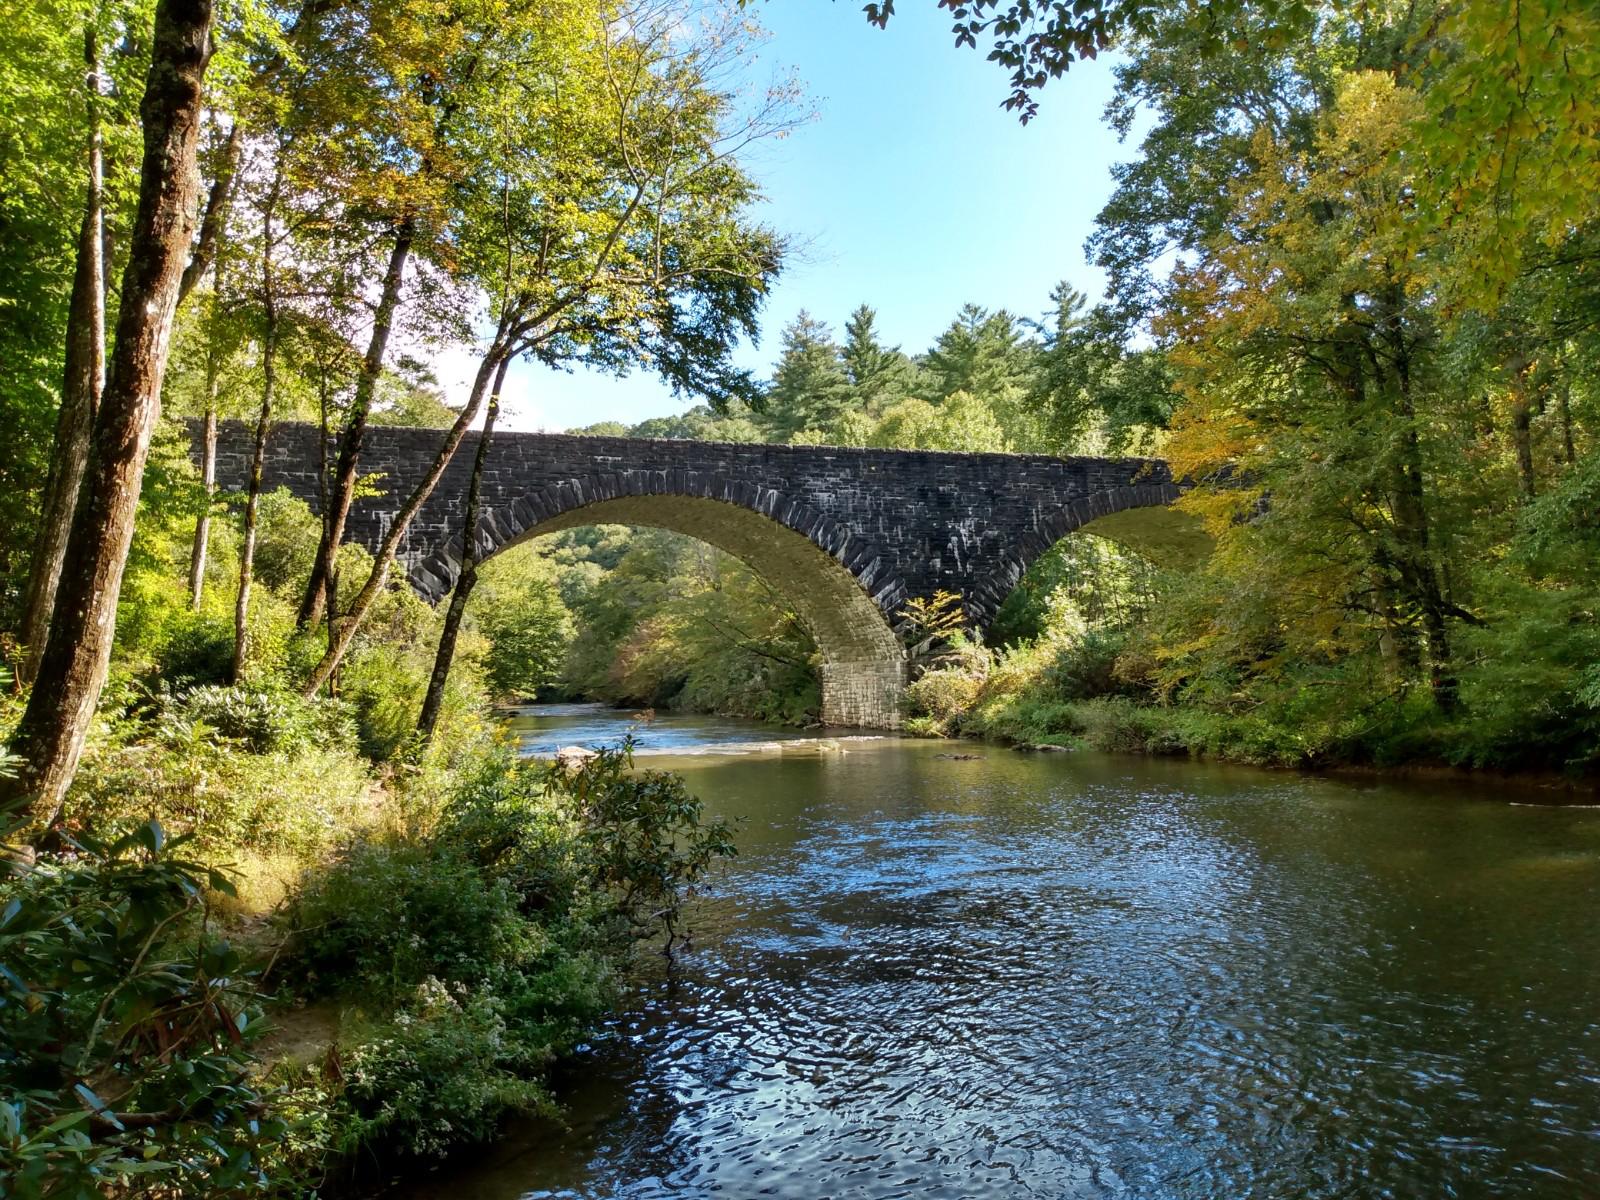 A stone bridge arches over a forested river